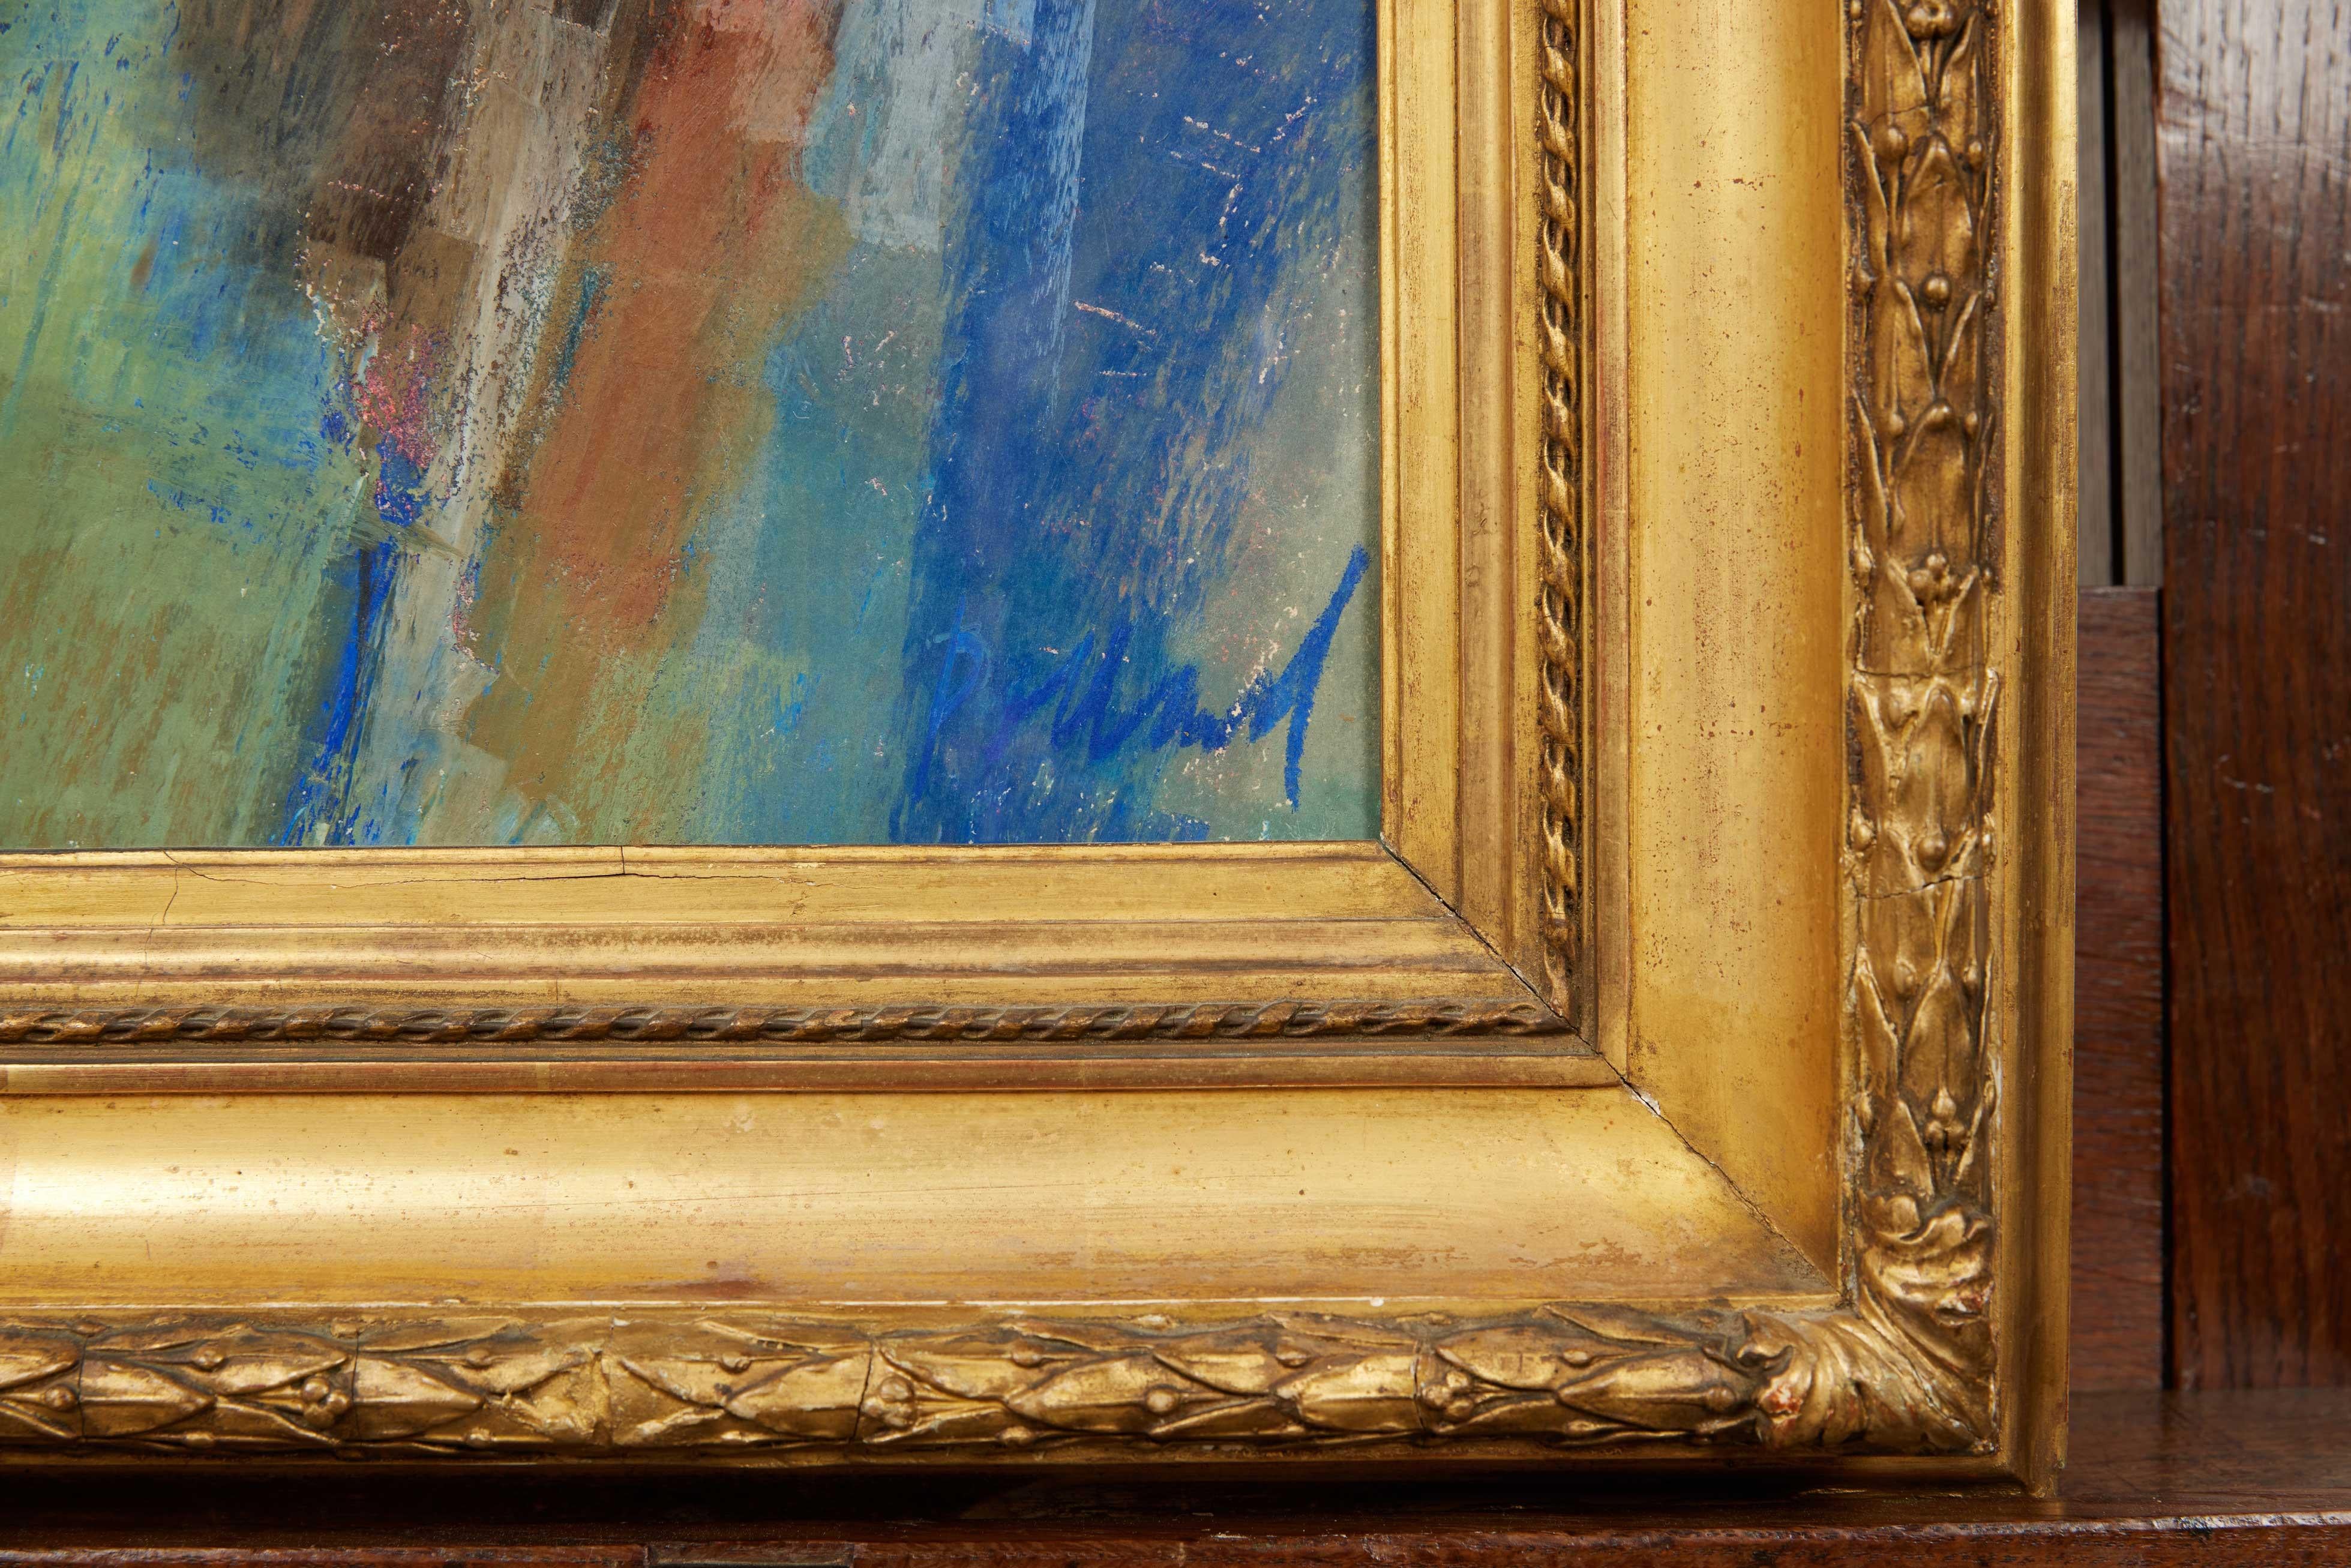 Mid Century Abstract Art, signed lower right by Alice Esther Pollard (1867-1933) Housed in a 19th C Gilt Frame

Alice Esther Pollard was a painter who was active in St. Louis, Missouri, in the late 19th century and into the early 20th century. She